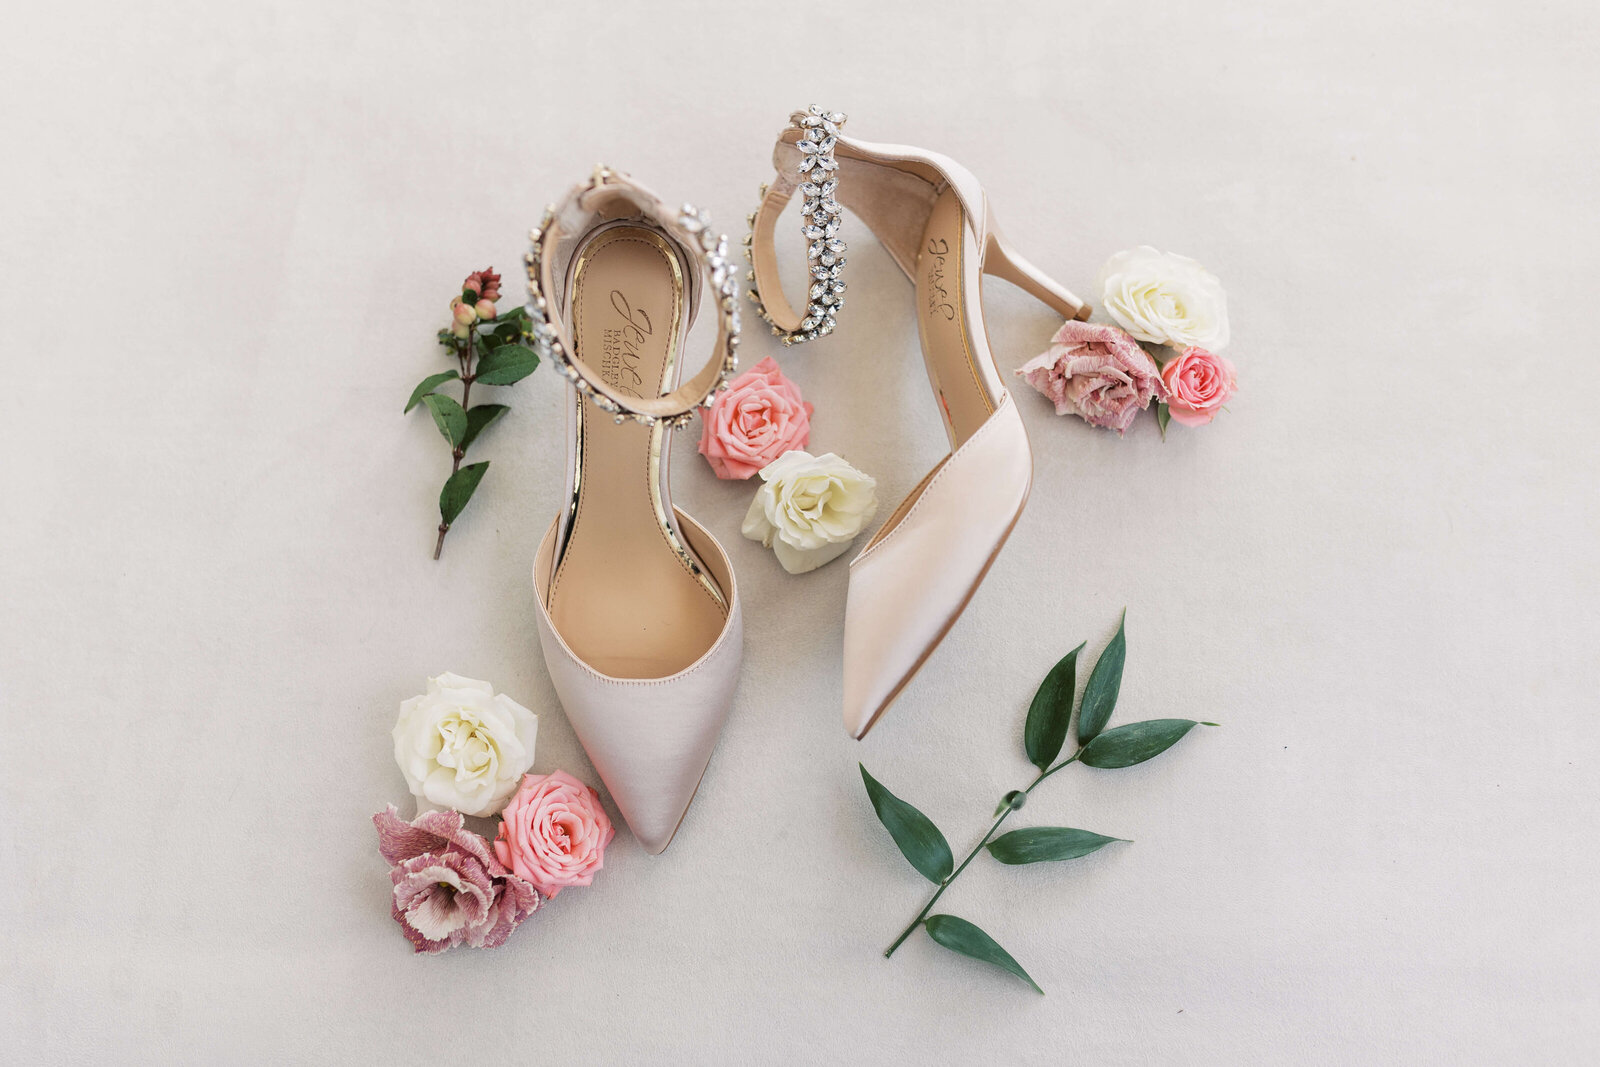 Bridal shoes styled with extra florals from the bride's florist.